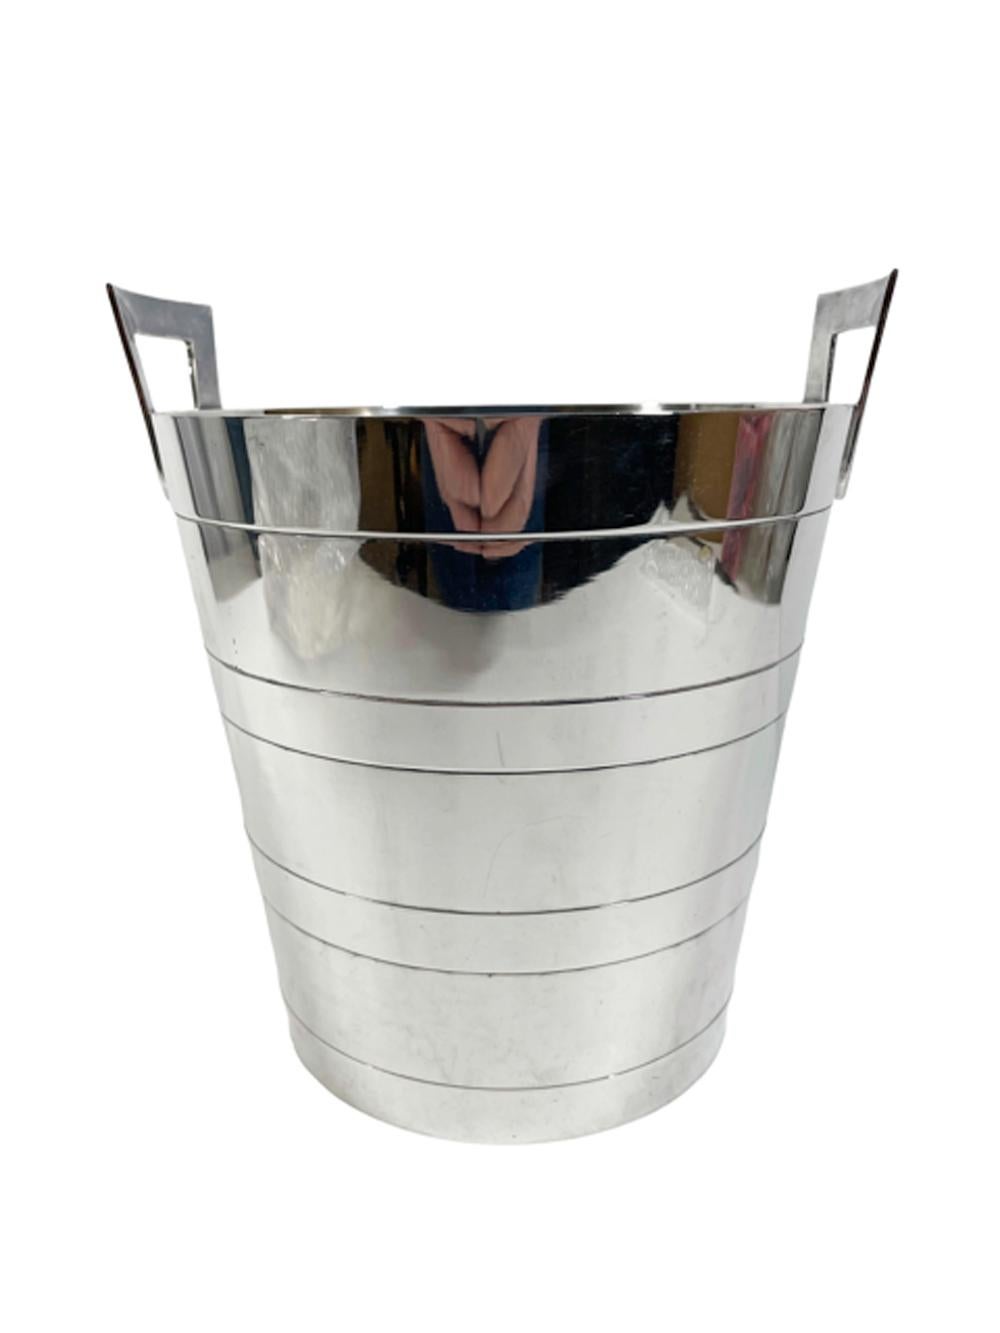 Art Deco silver plate champagne bucket / wine cooler of tapered form with incised bands and squared fixed handles, the interior with a pierced strainer set above the base to raise the ice above the water.